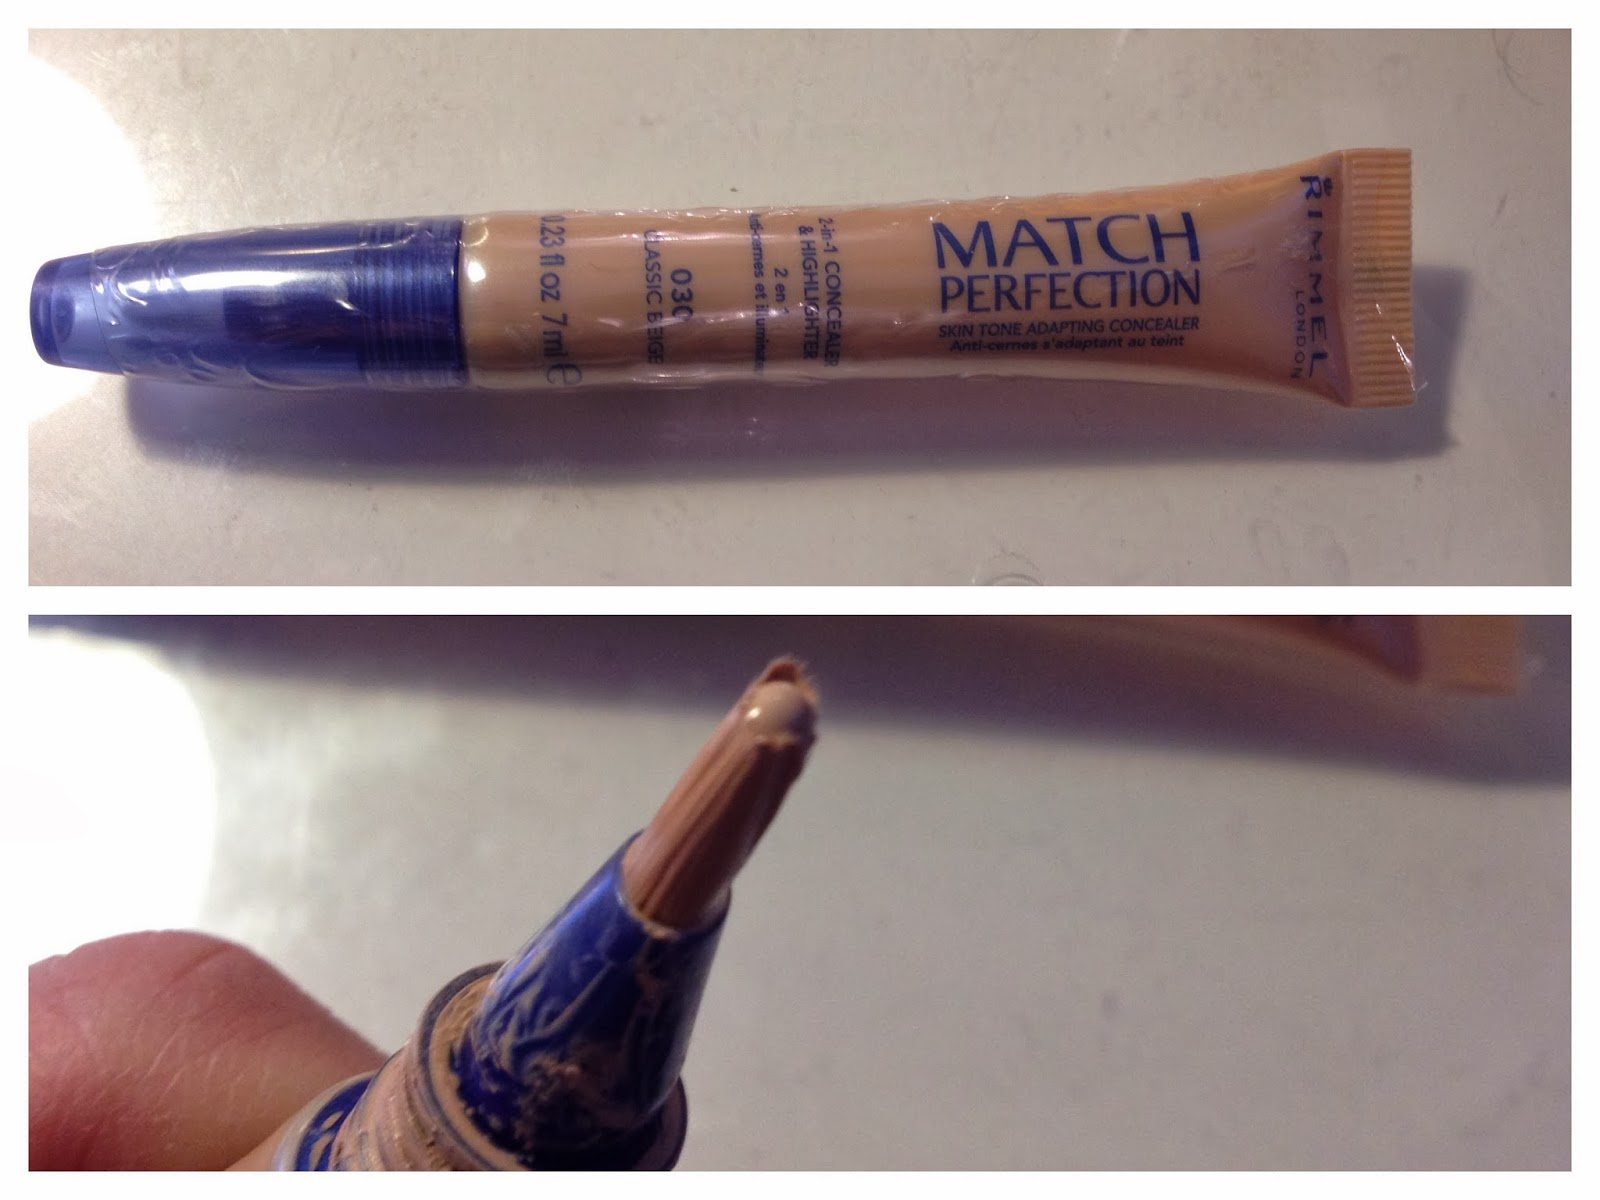 My Rimmel Match Perfection Concealer: A Review